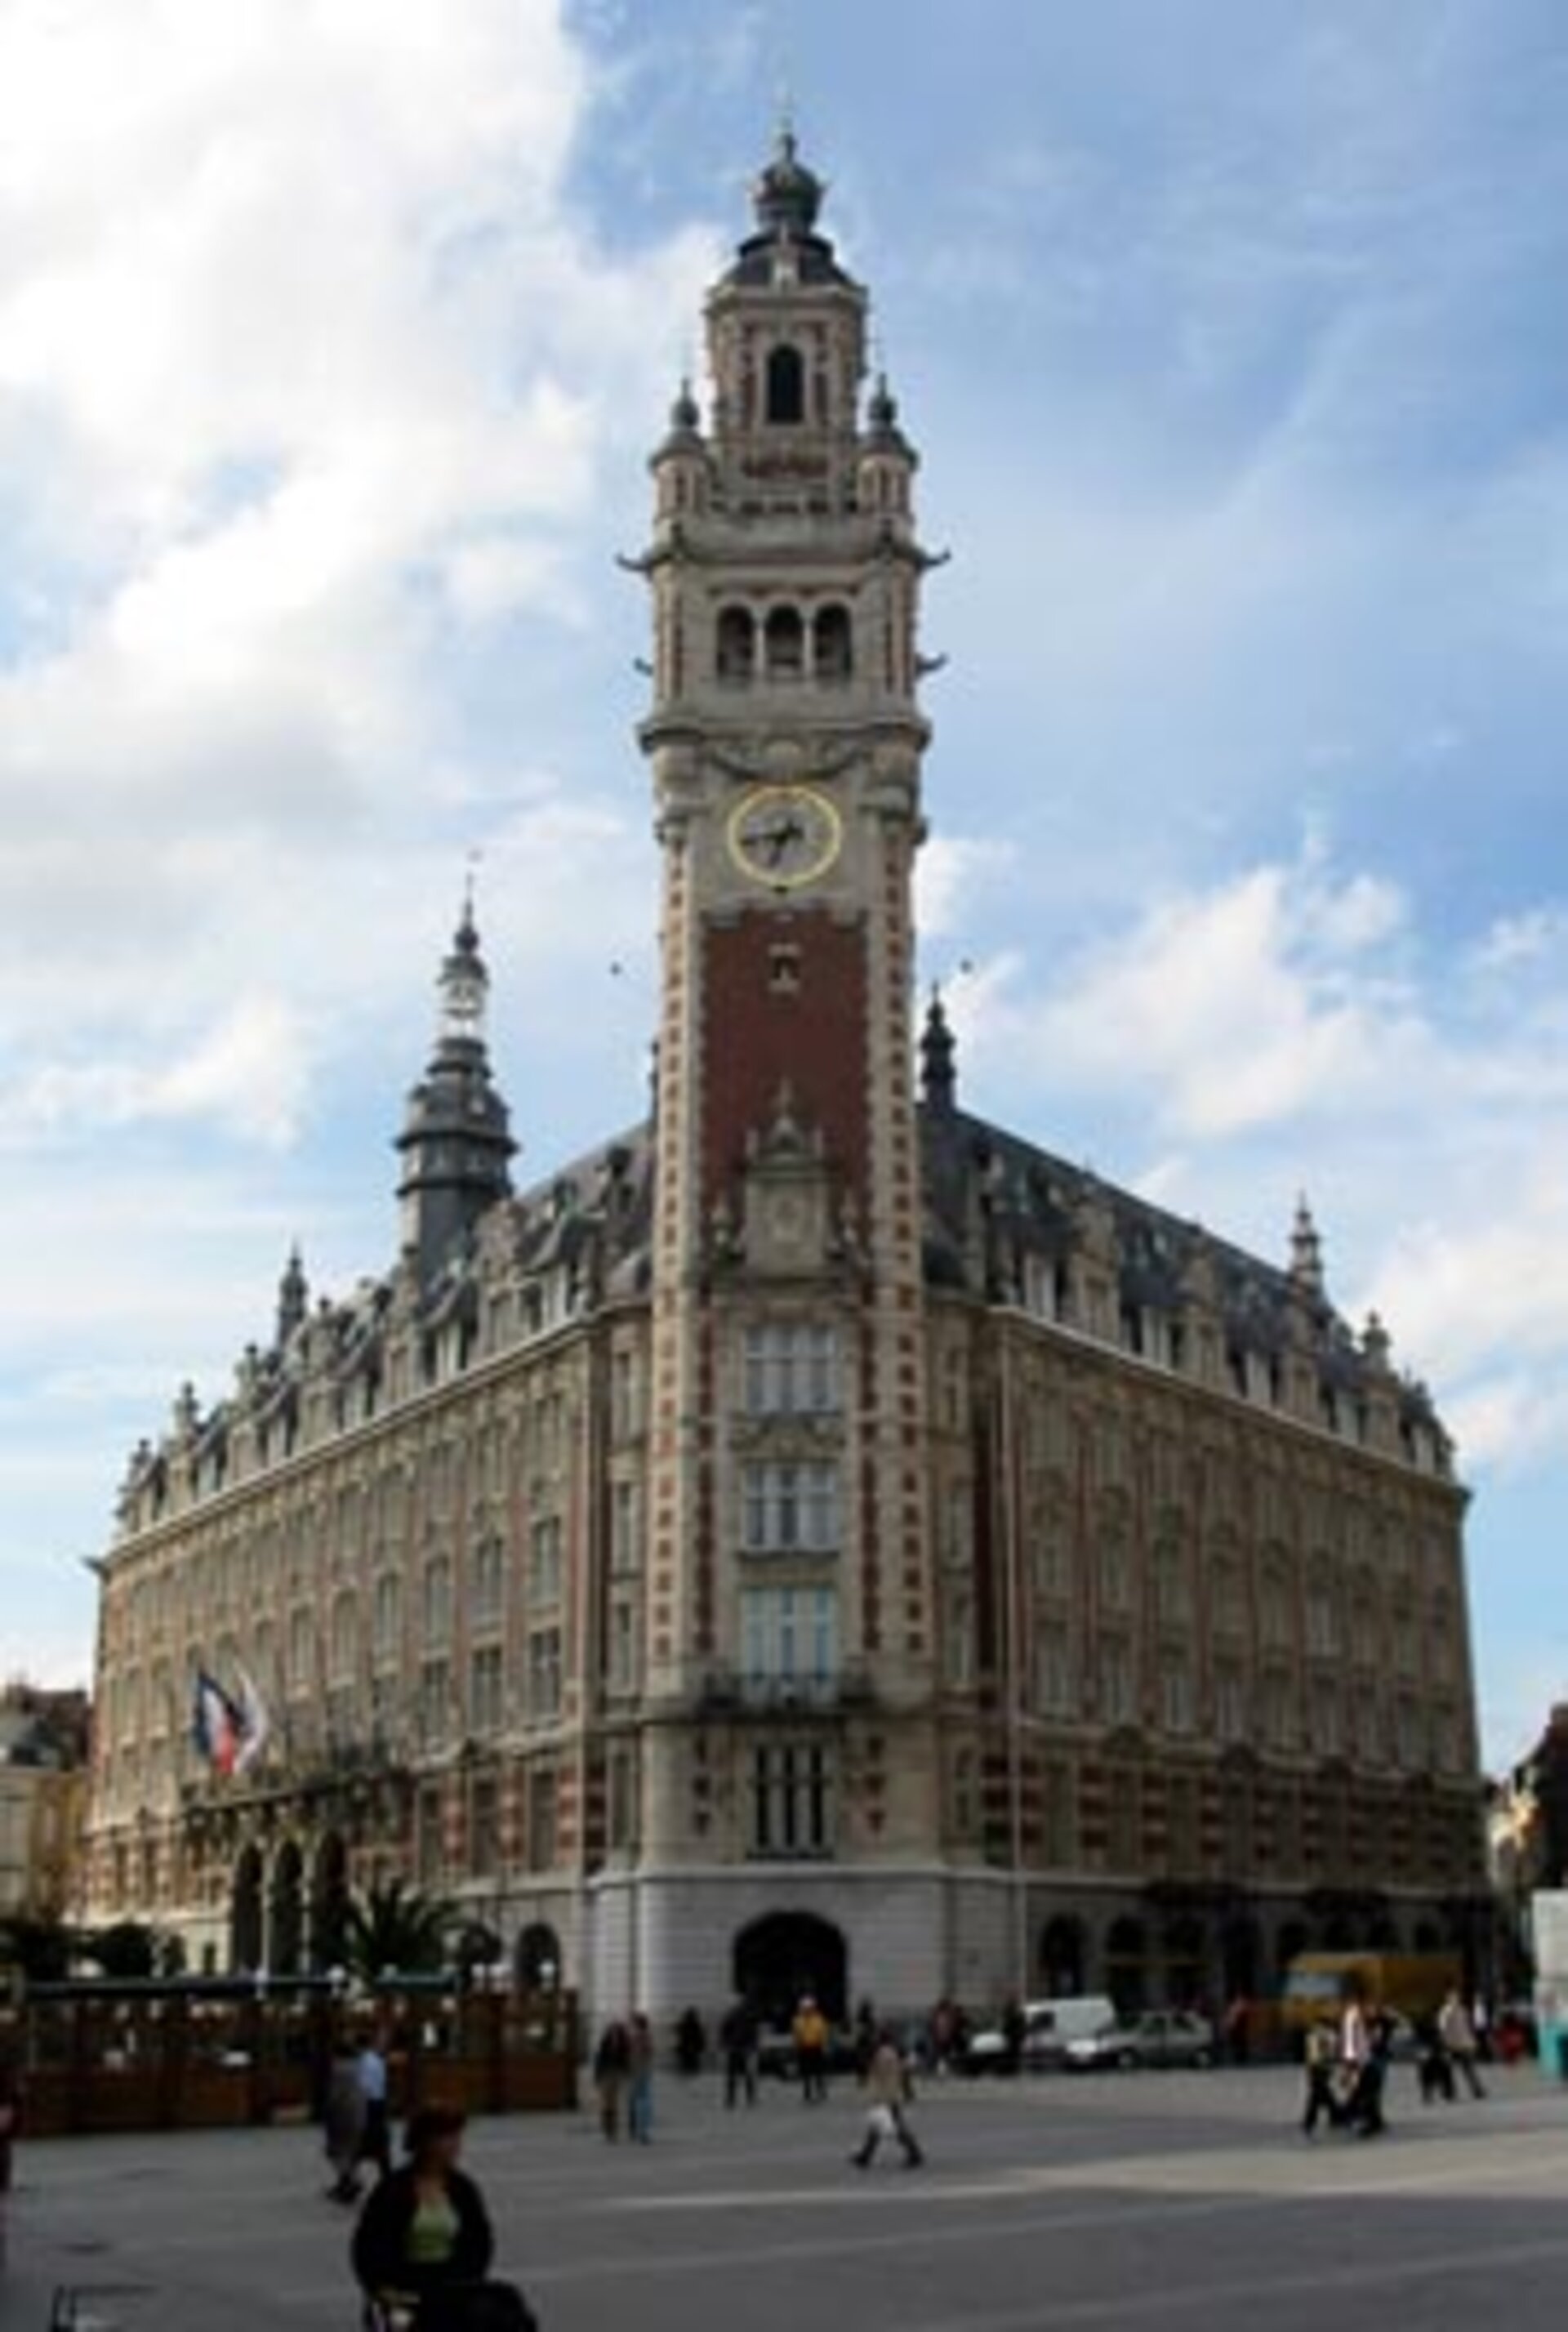 Lille – centre of one of Europe's principal textile regions